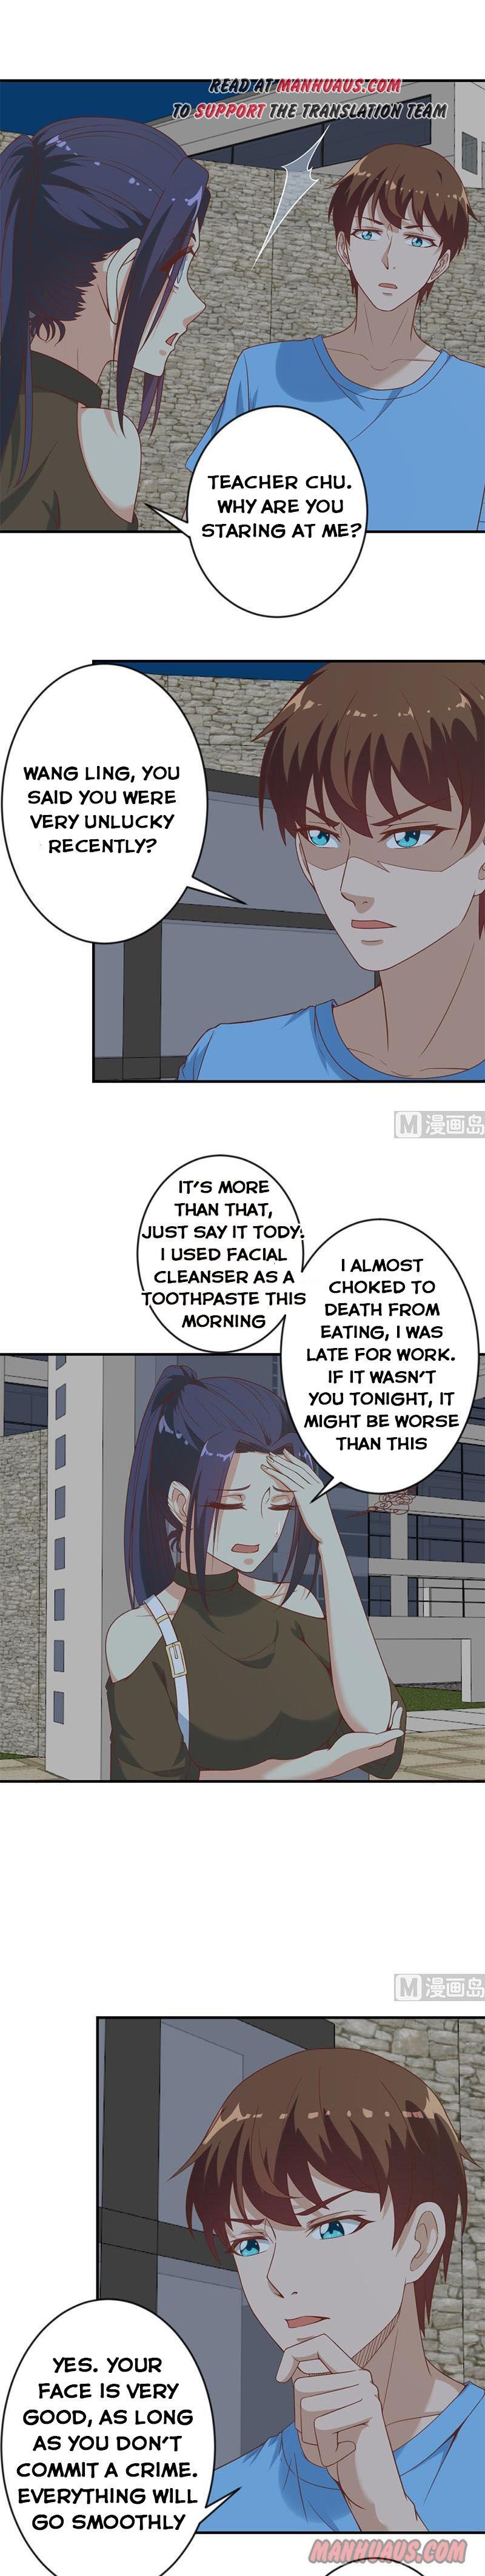 Cultivation Return on Campus Chapter 29 page 4